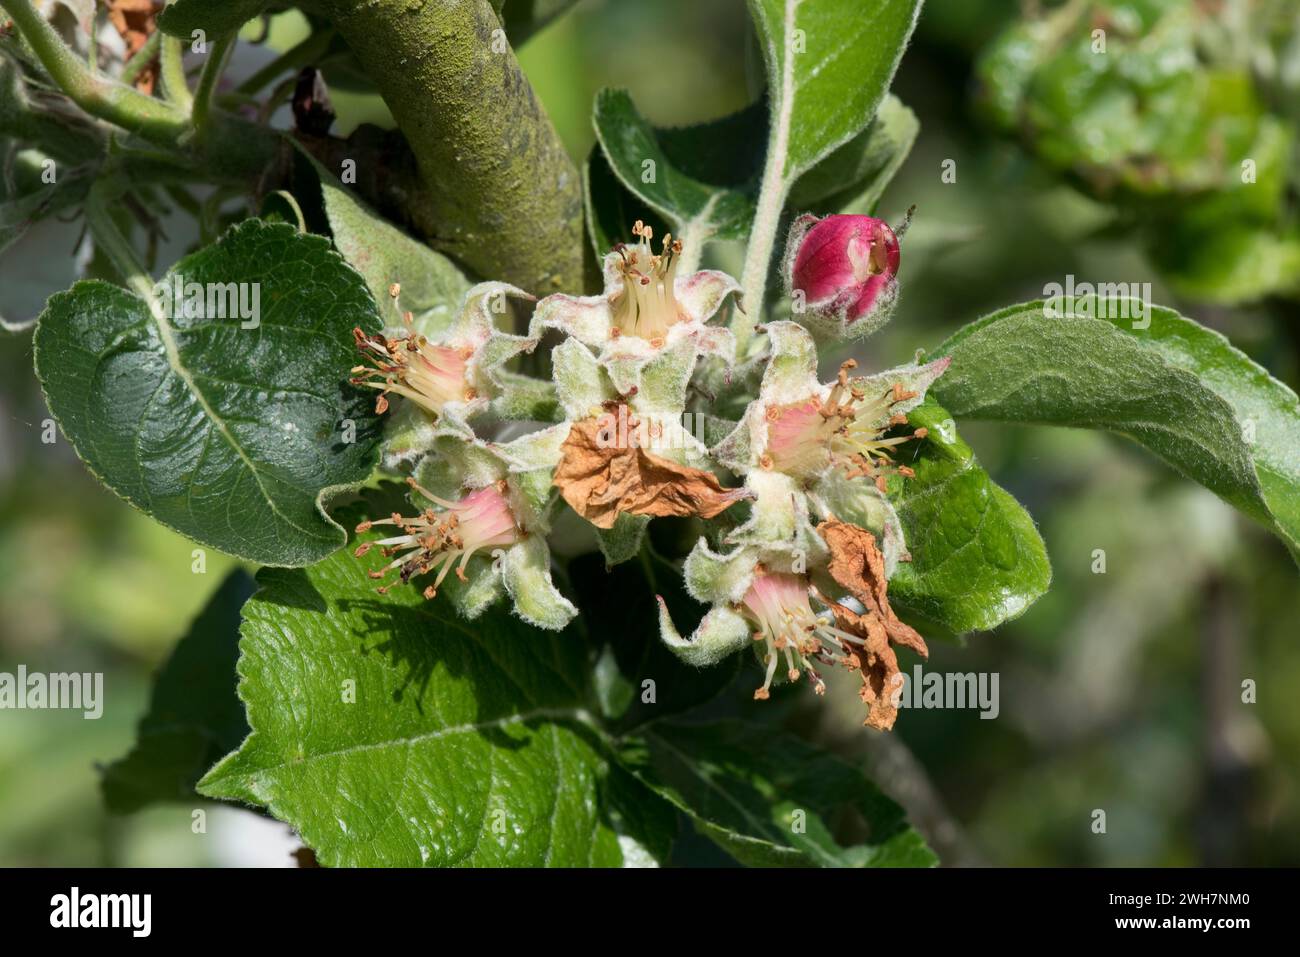 Apple blossom, flowers at 'petal fall' with calyx and five sepals around the pollinated anthers and central ovary at fruit set, Berkshire, May Stock Photo